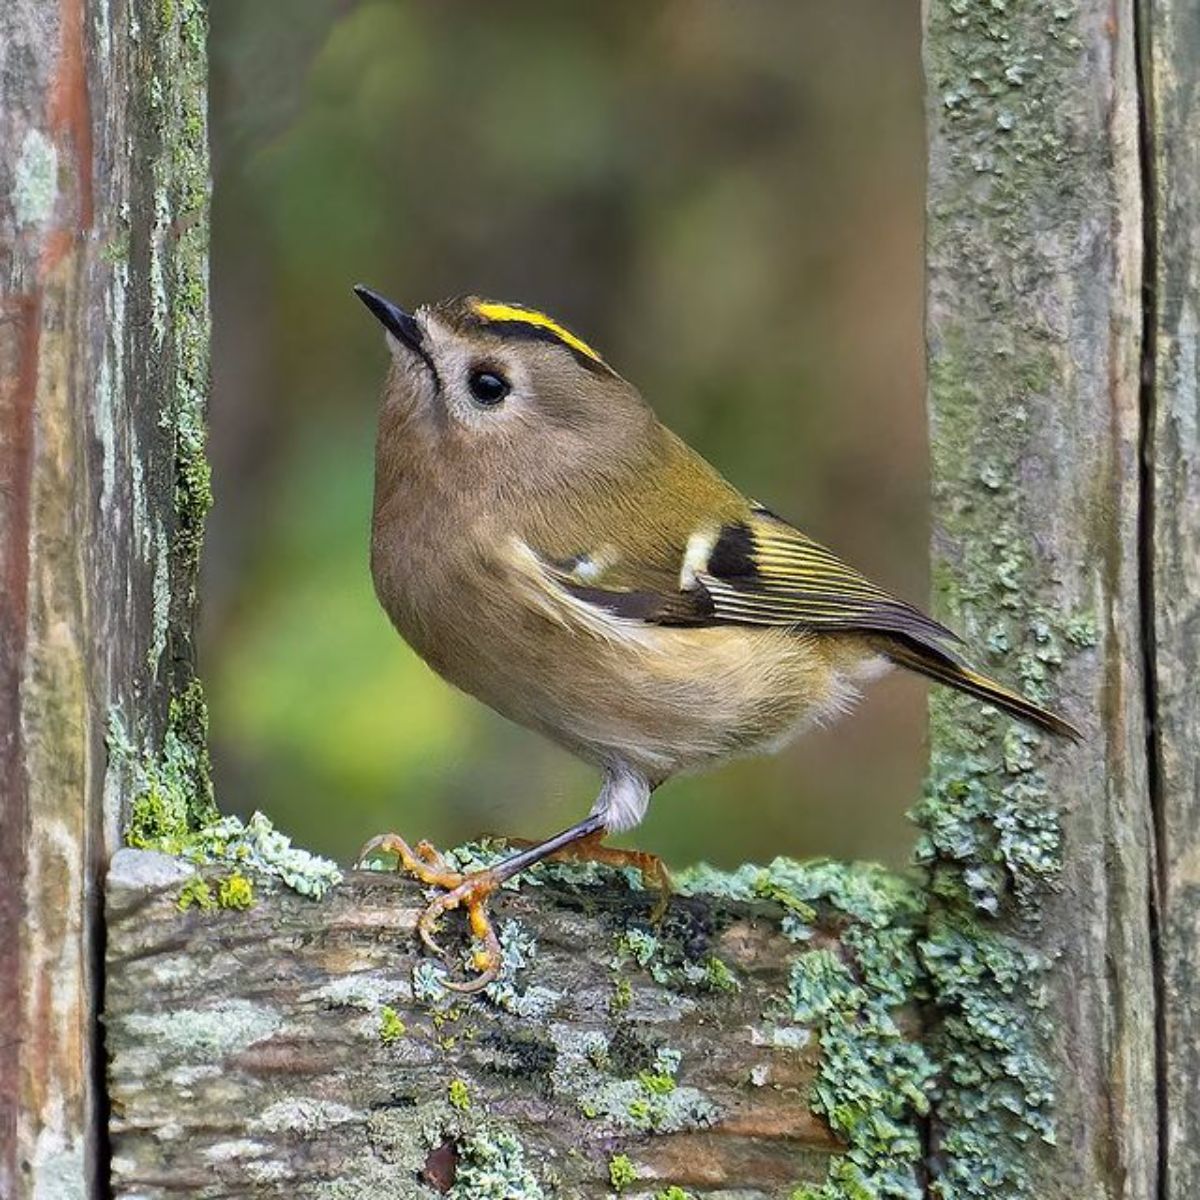 An adorable Goldcrest perched on a moss-covered wooden fence.